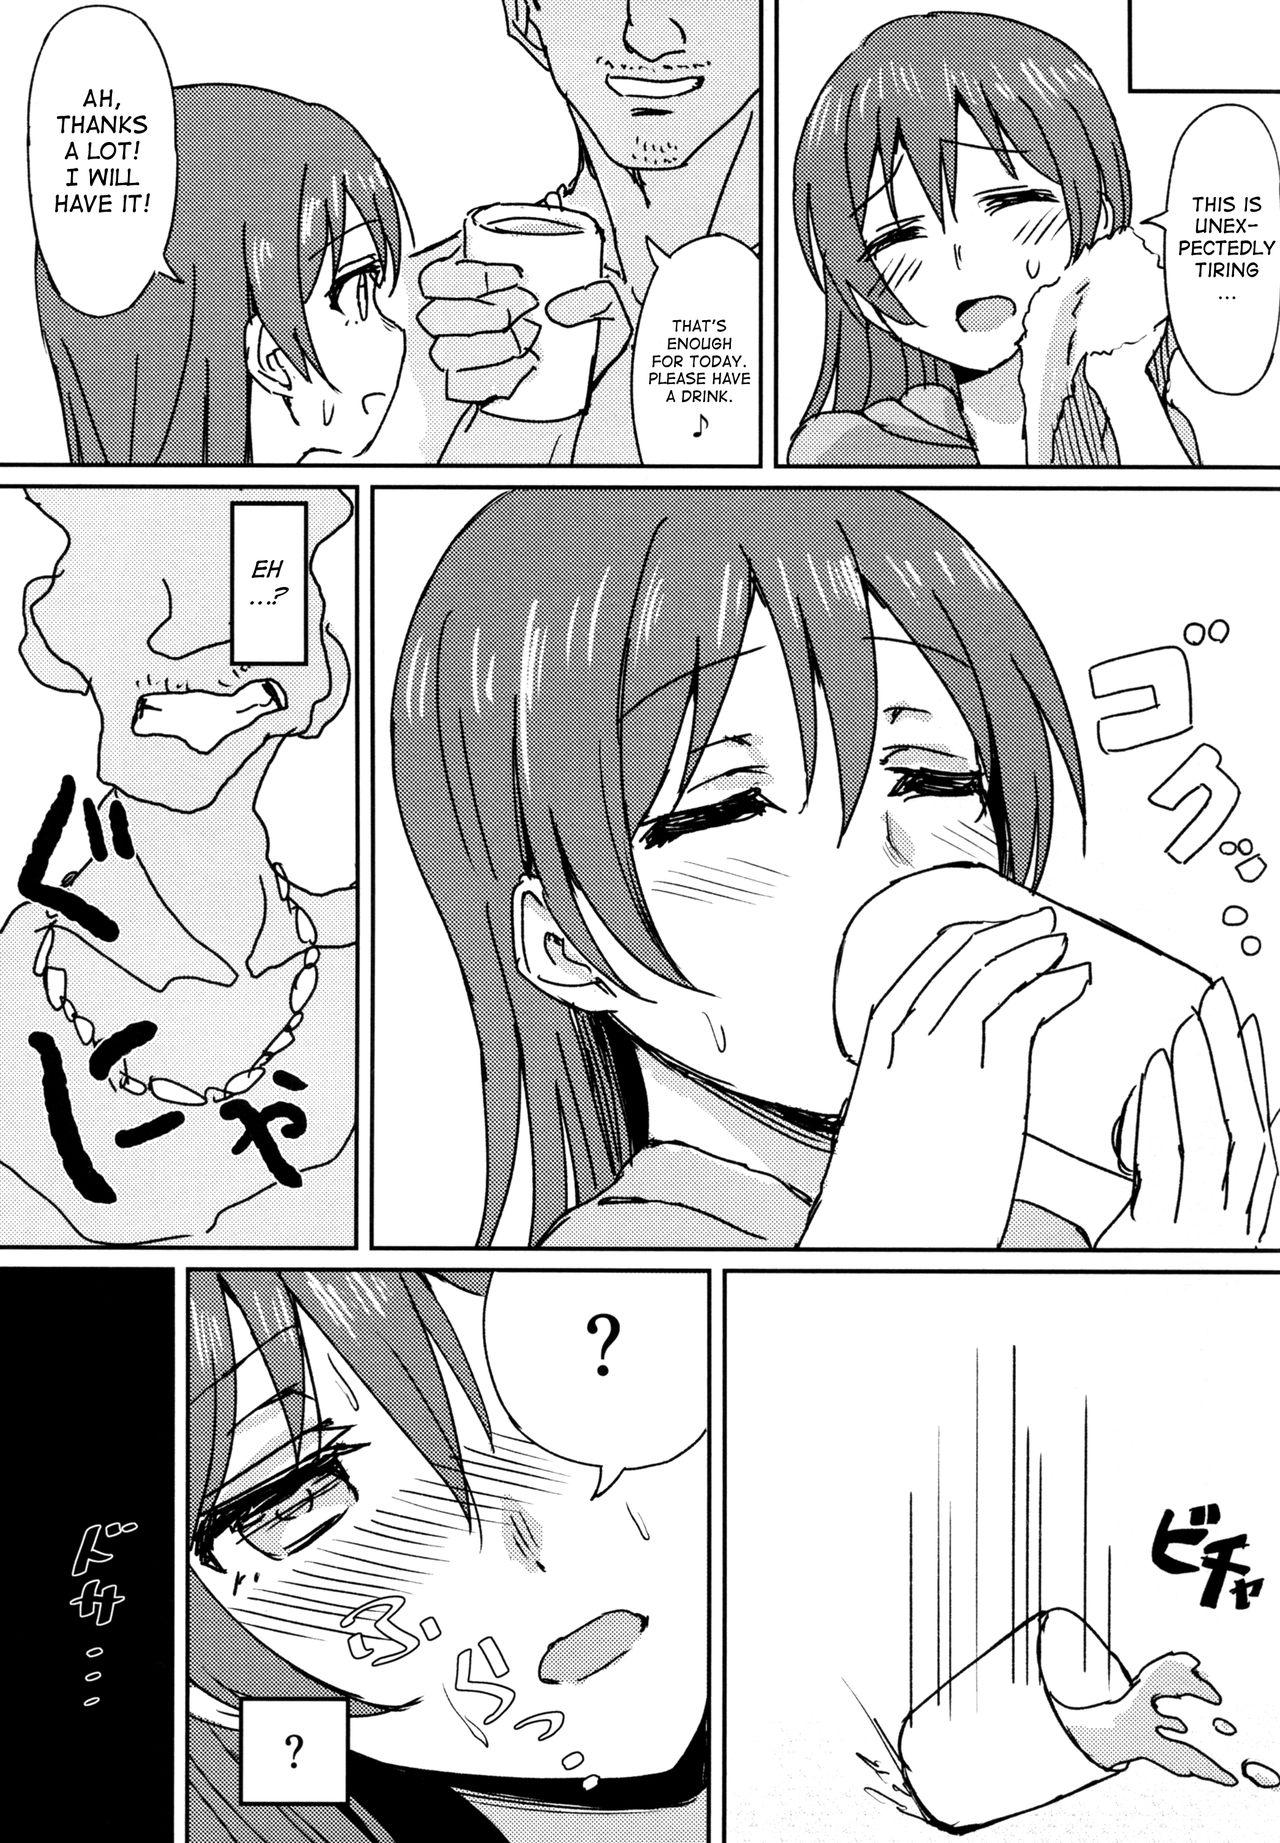 Best Blowjobs Hah,Wrench This! - Love live Lick - Page 9